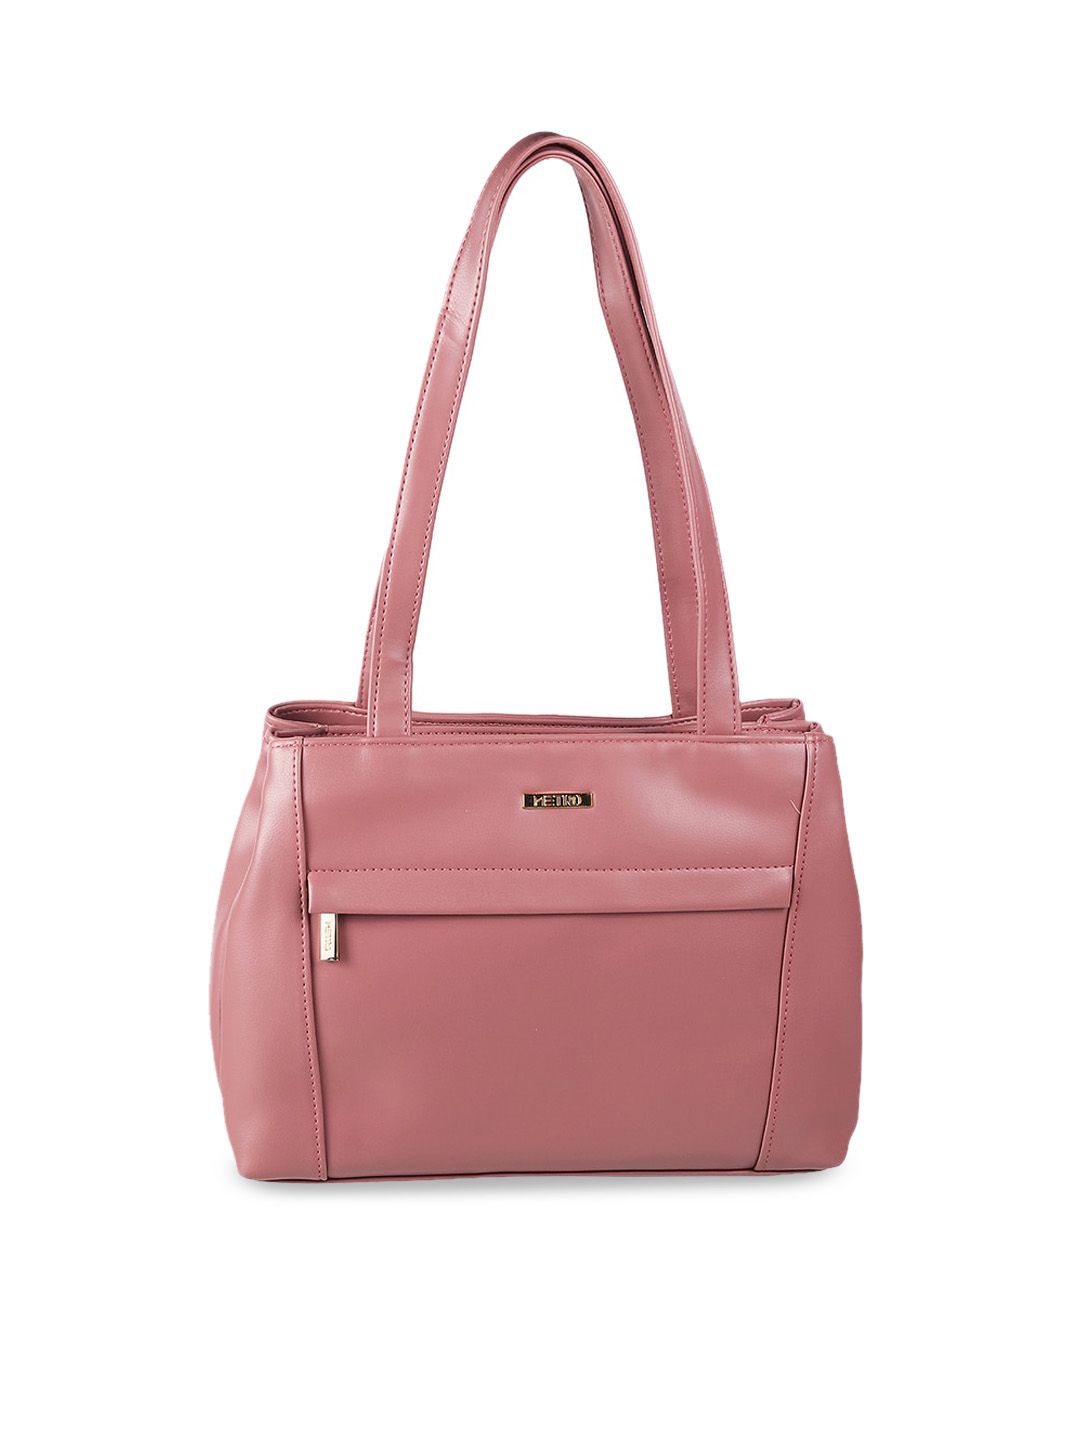 Metro Peach-Coloured Textured PU Structured Shoulder Bag Price in India